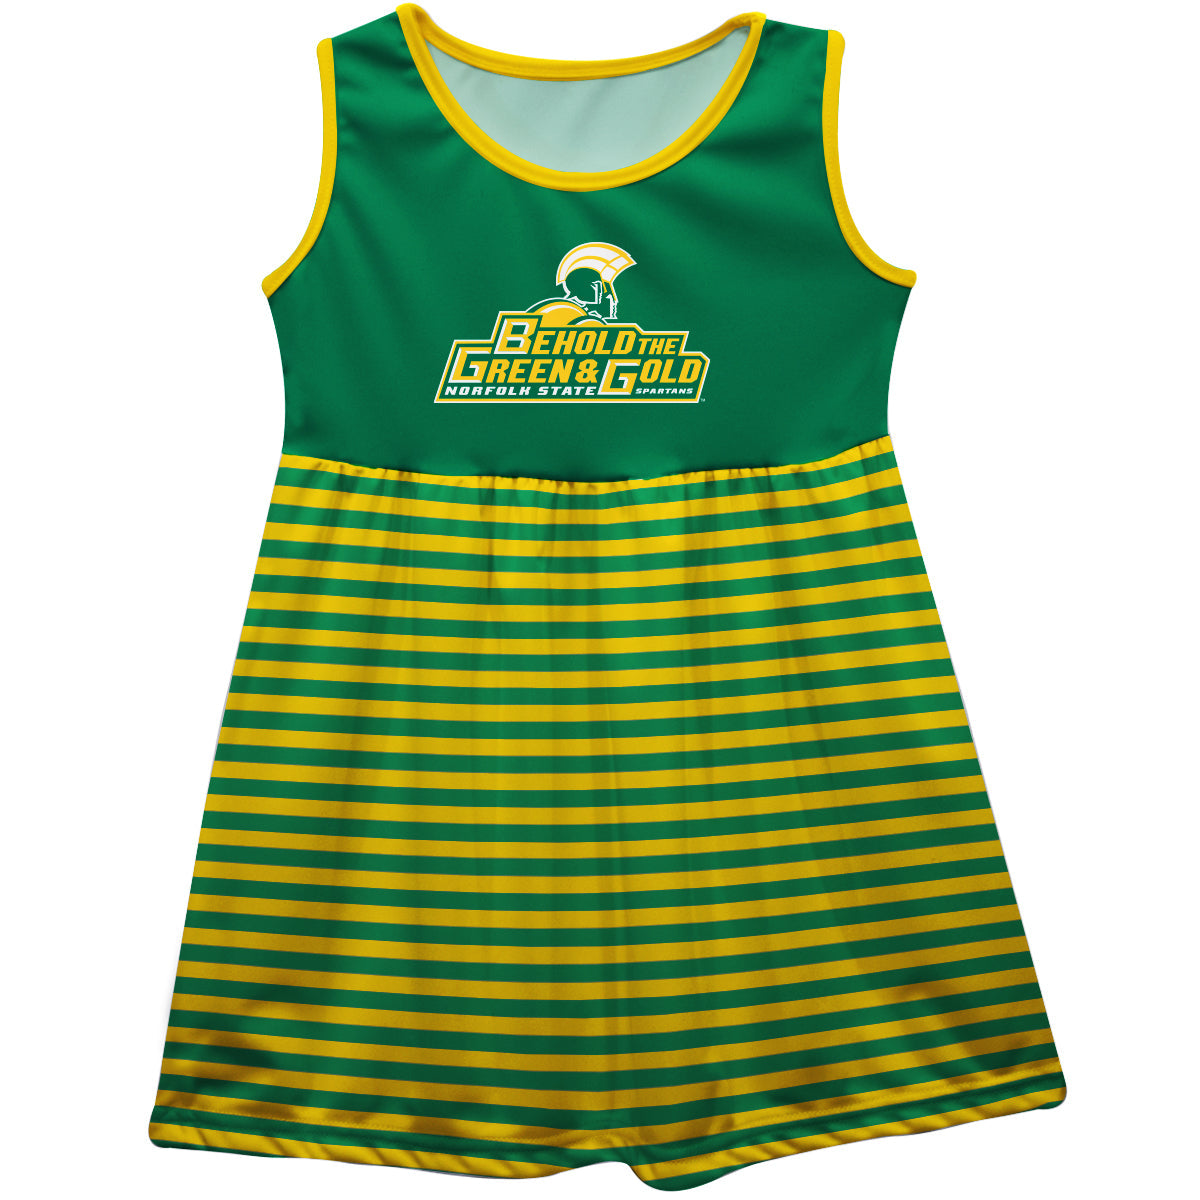 Norfolk State Spartans Girls Game Day Sleeveless Tank Dress Solid Green Logo Stripes on Skirt by Vive La Fete-Campus-Wardrobe